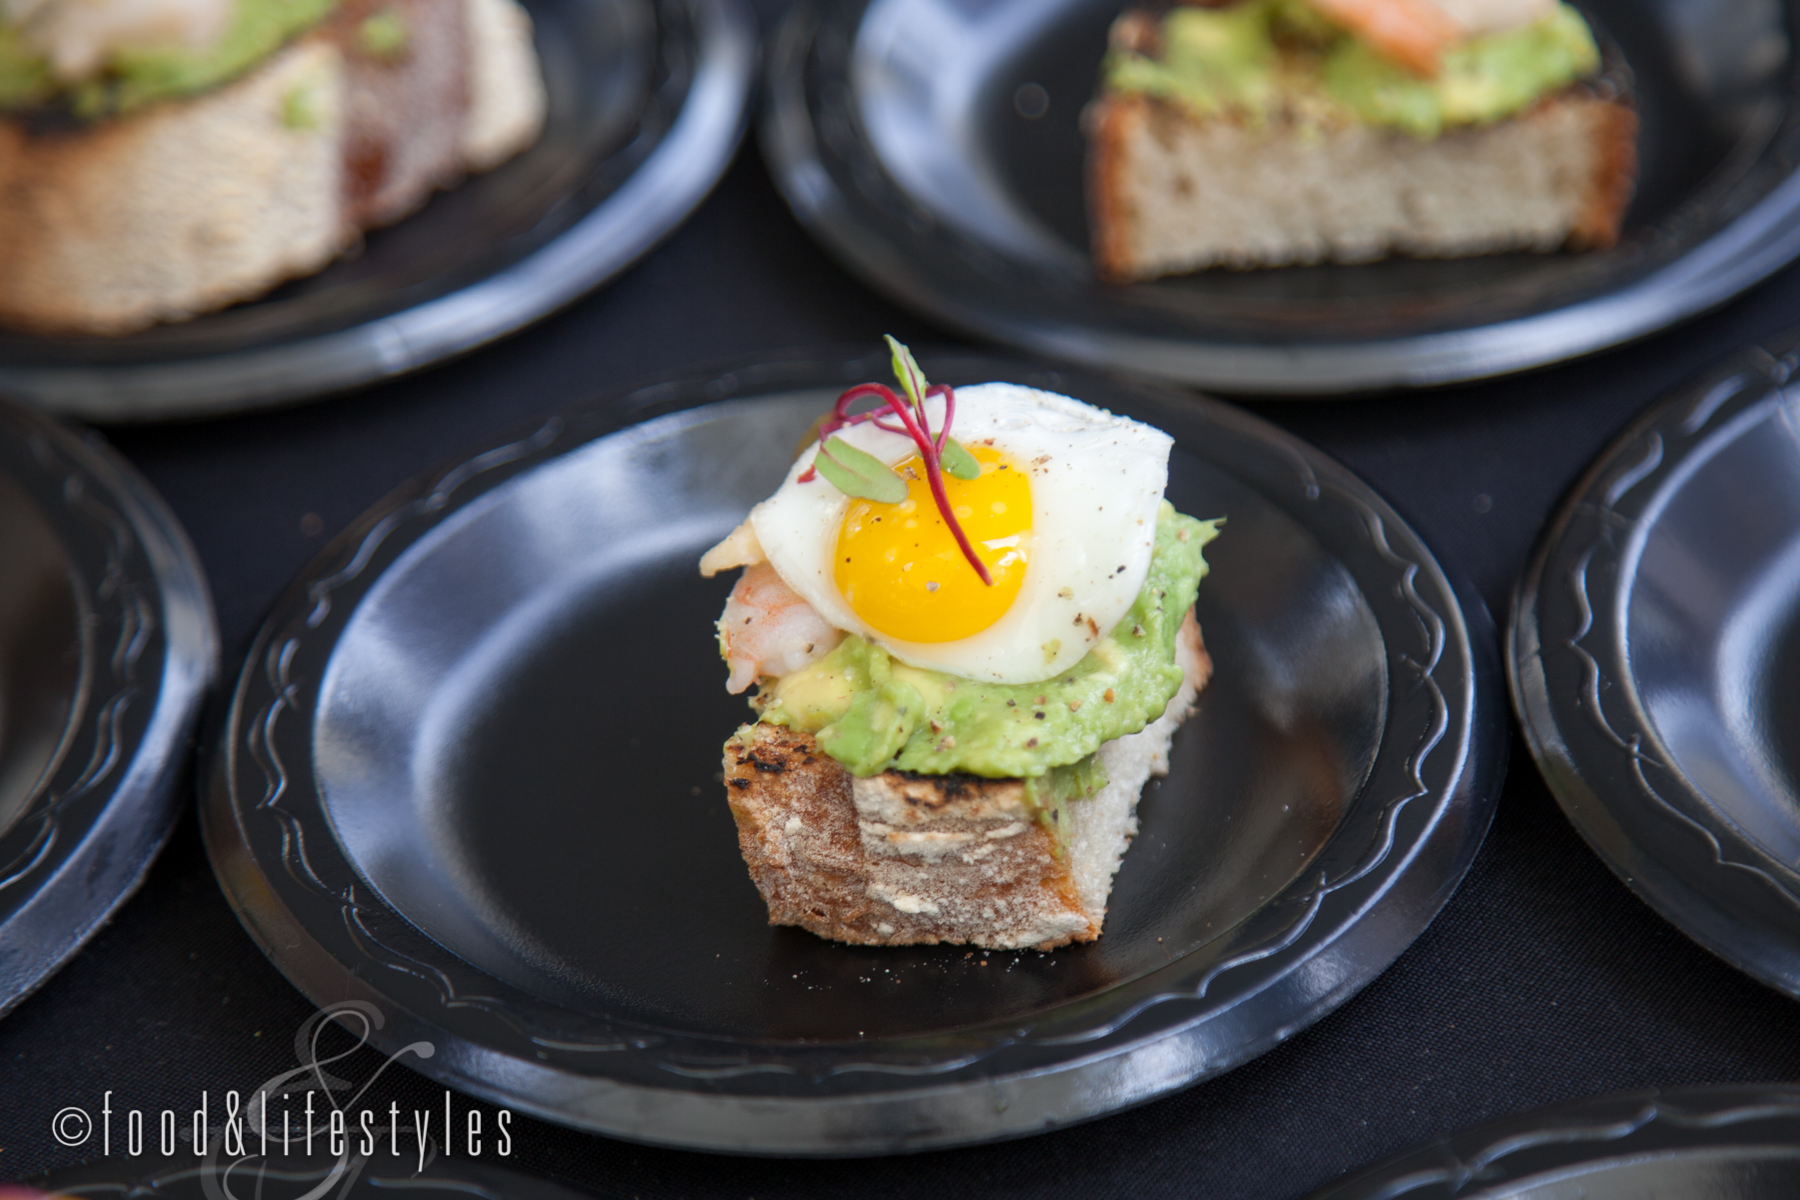 The Vig: Butter-poached shrimp on avocado toast with quail egg